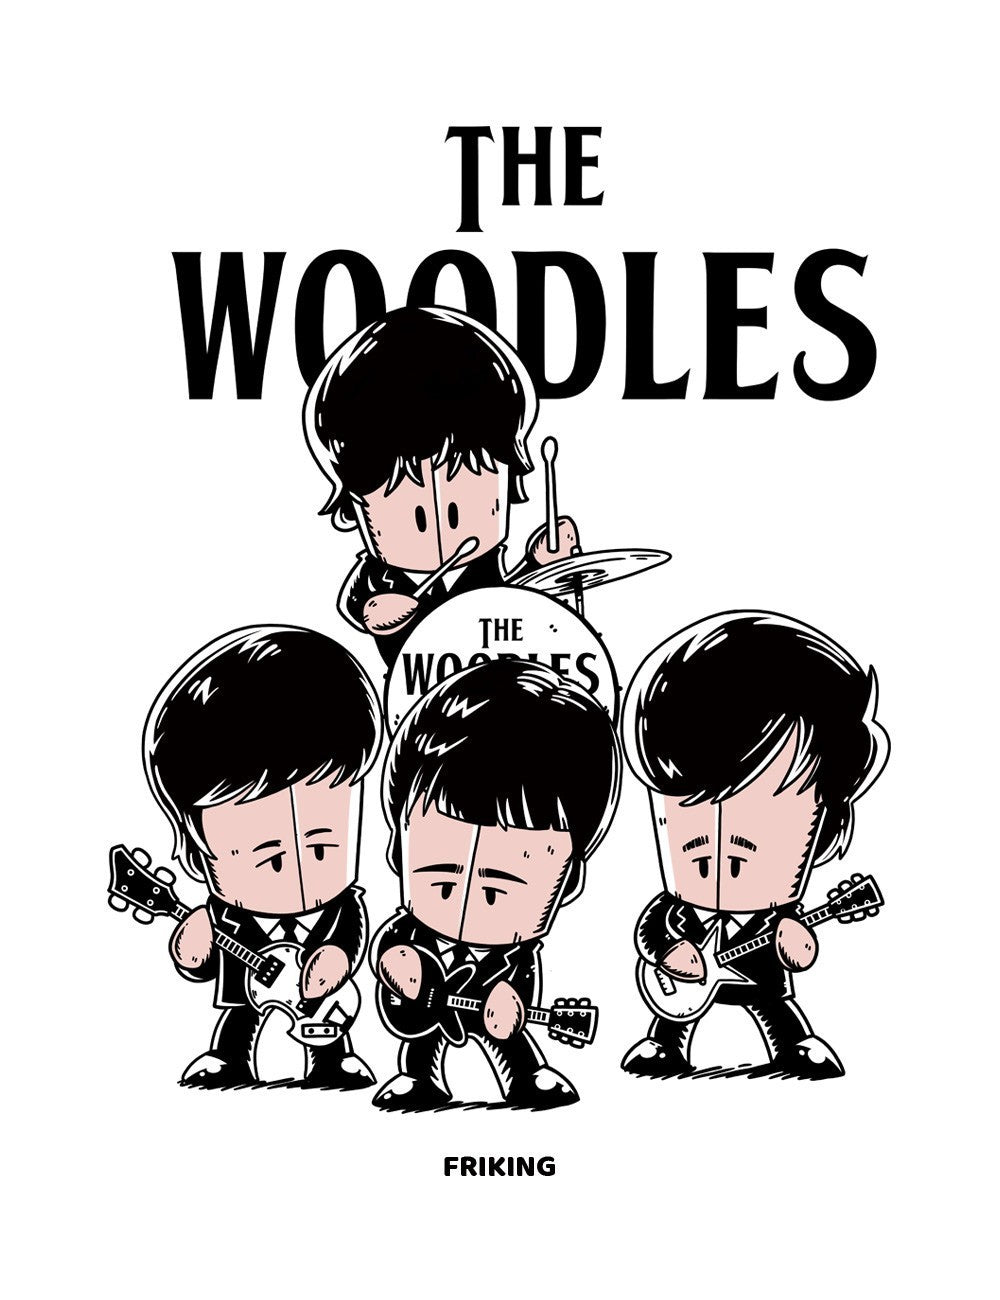  The Woodles 